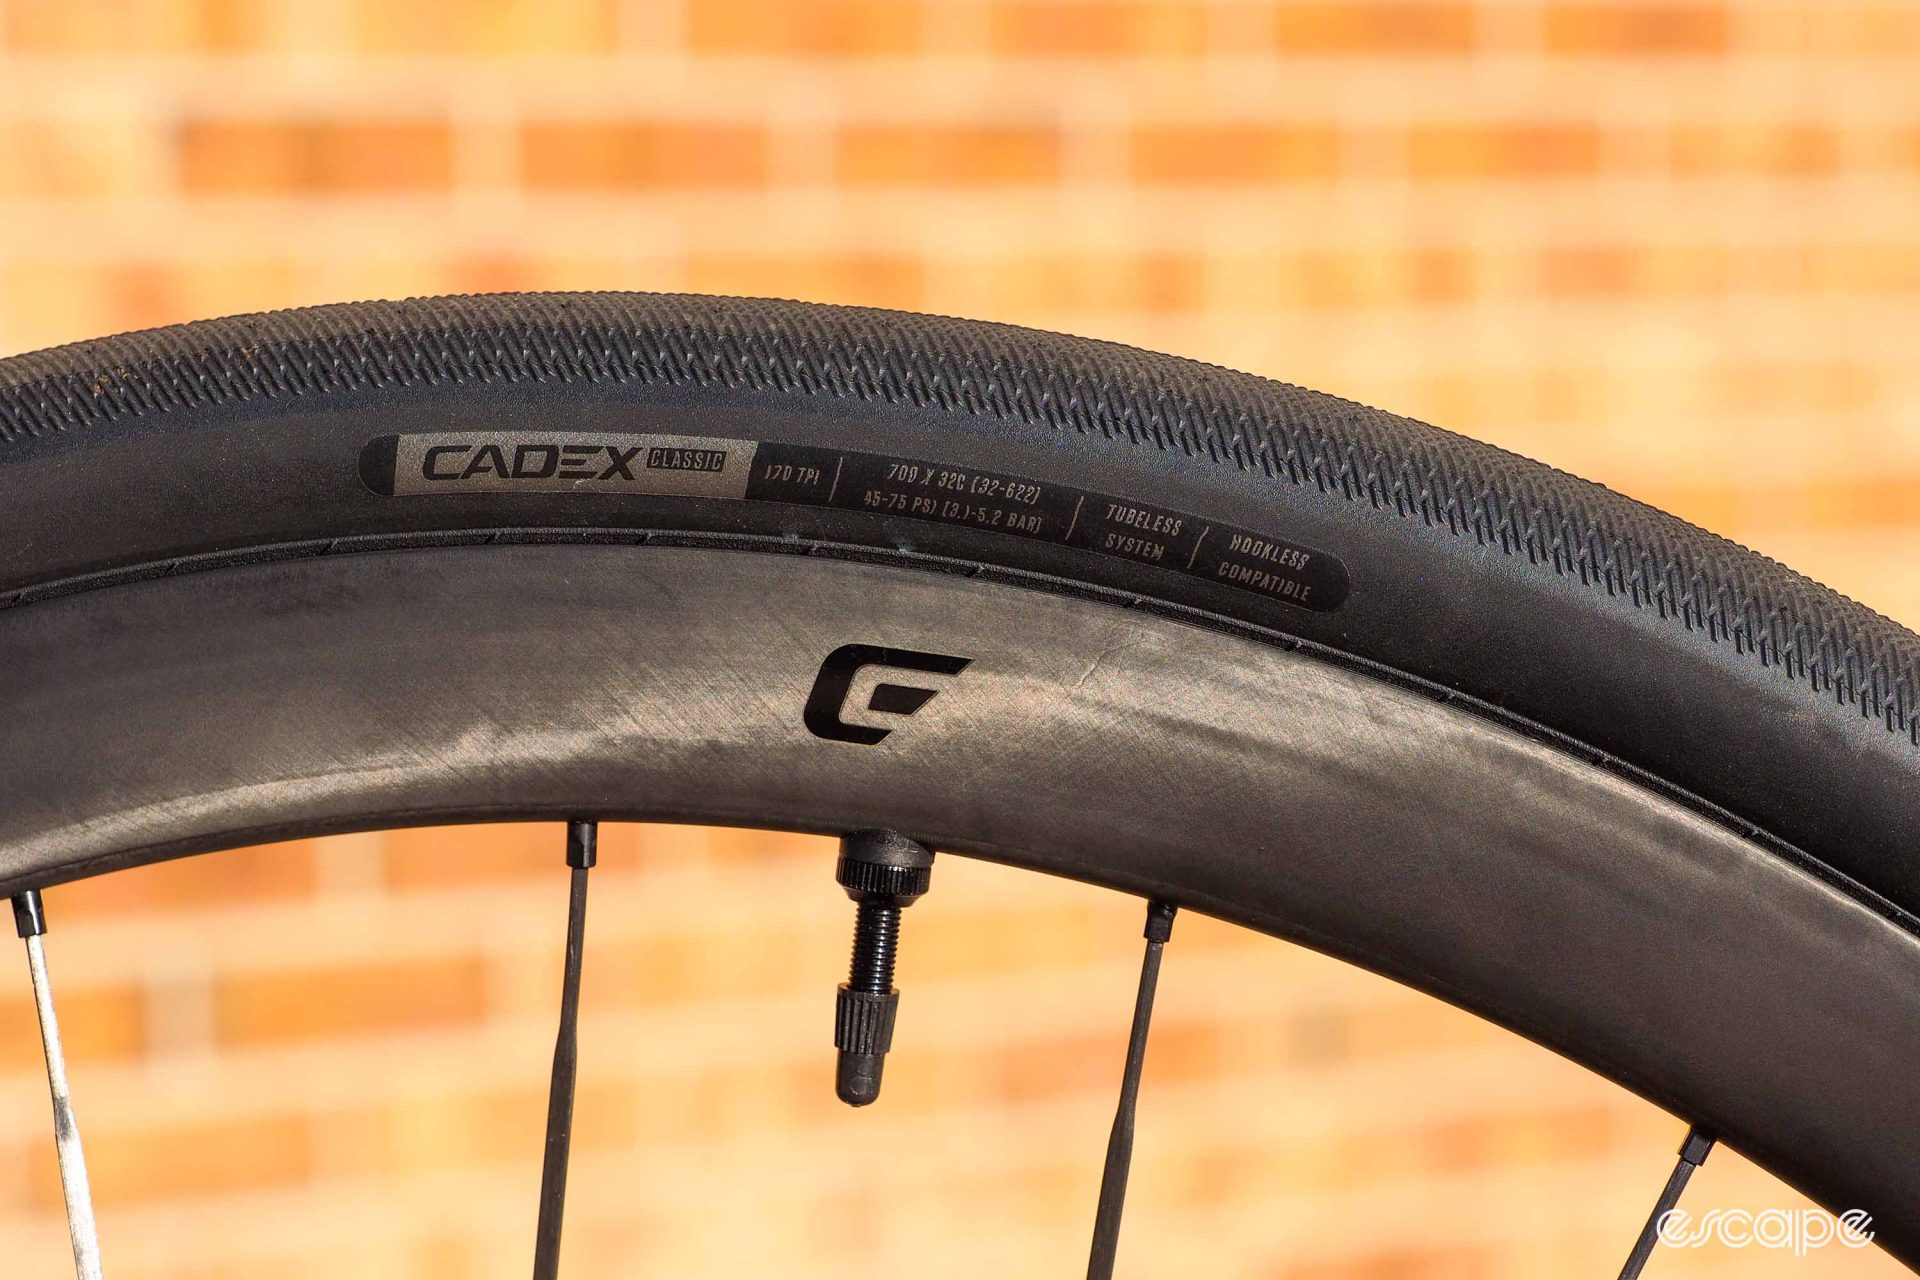 The Cadex tires from the side, showing a low-profile tread with almost zero height.